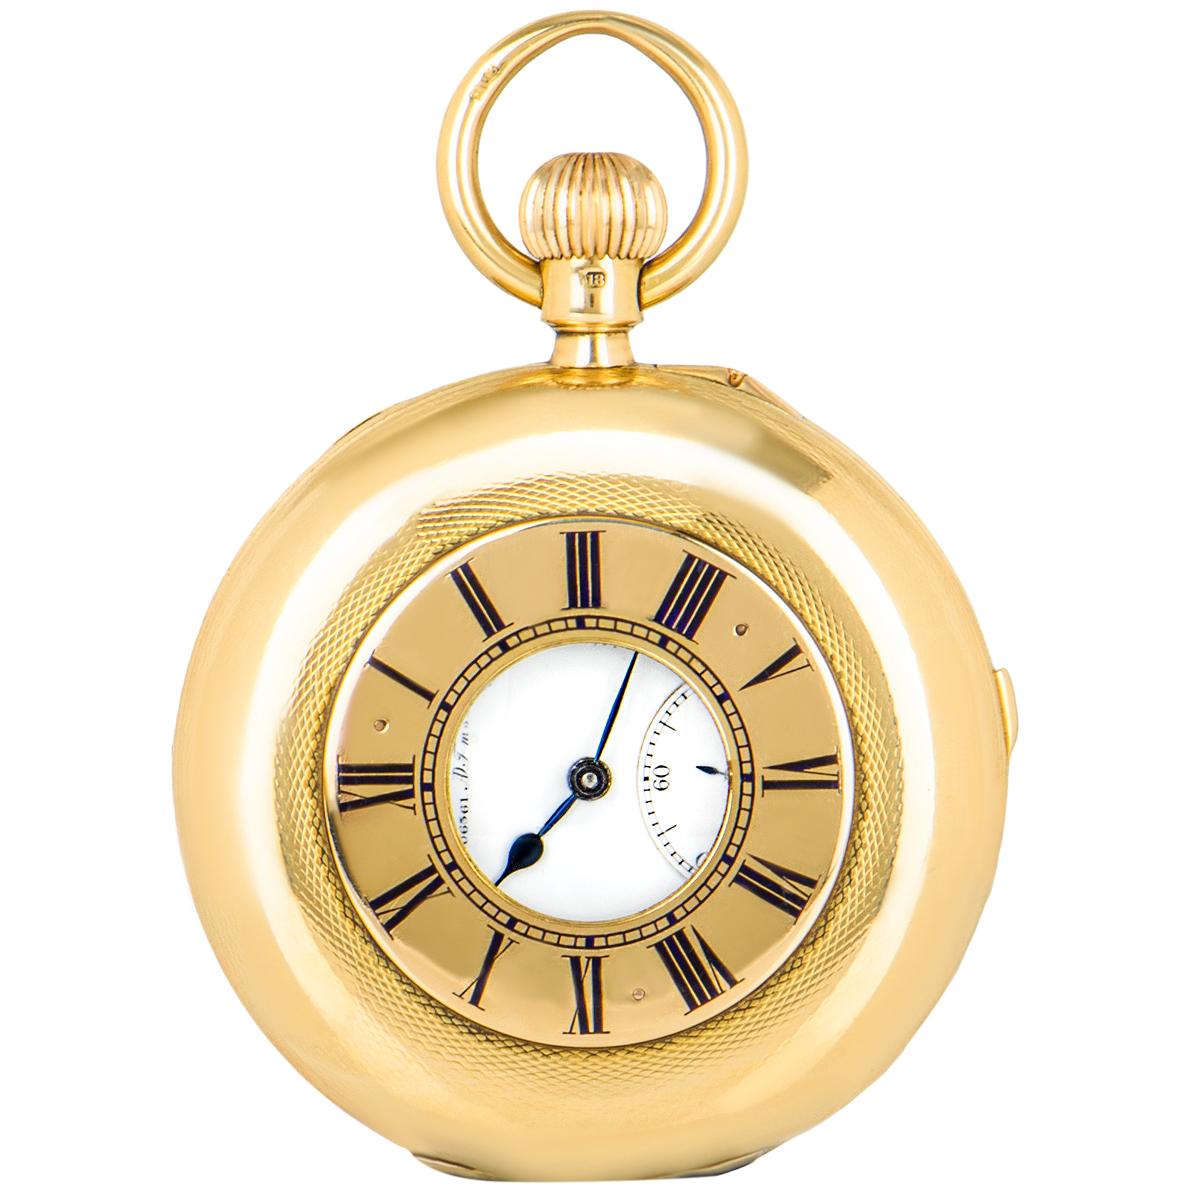 Charles Frodsham. A rare 18ct yellow gold half hunter half quarter repeating pocket watch, C1880s. with it's original box.

Dial: The fine enamel Roman dial signed and numbered CHAs Frodsham AD Fmsz with subsidiary seconds dial and original blued